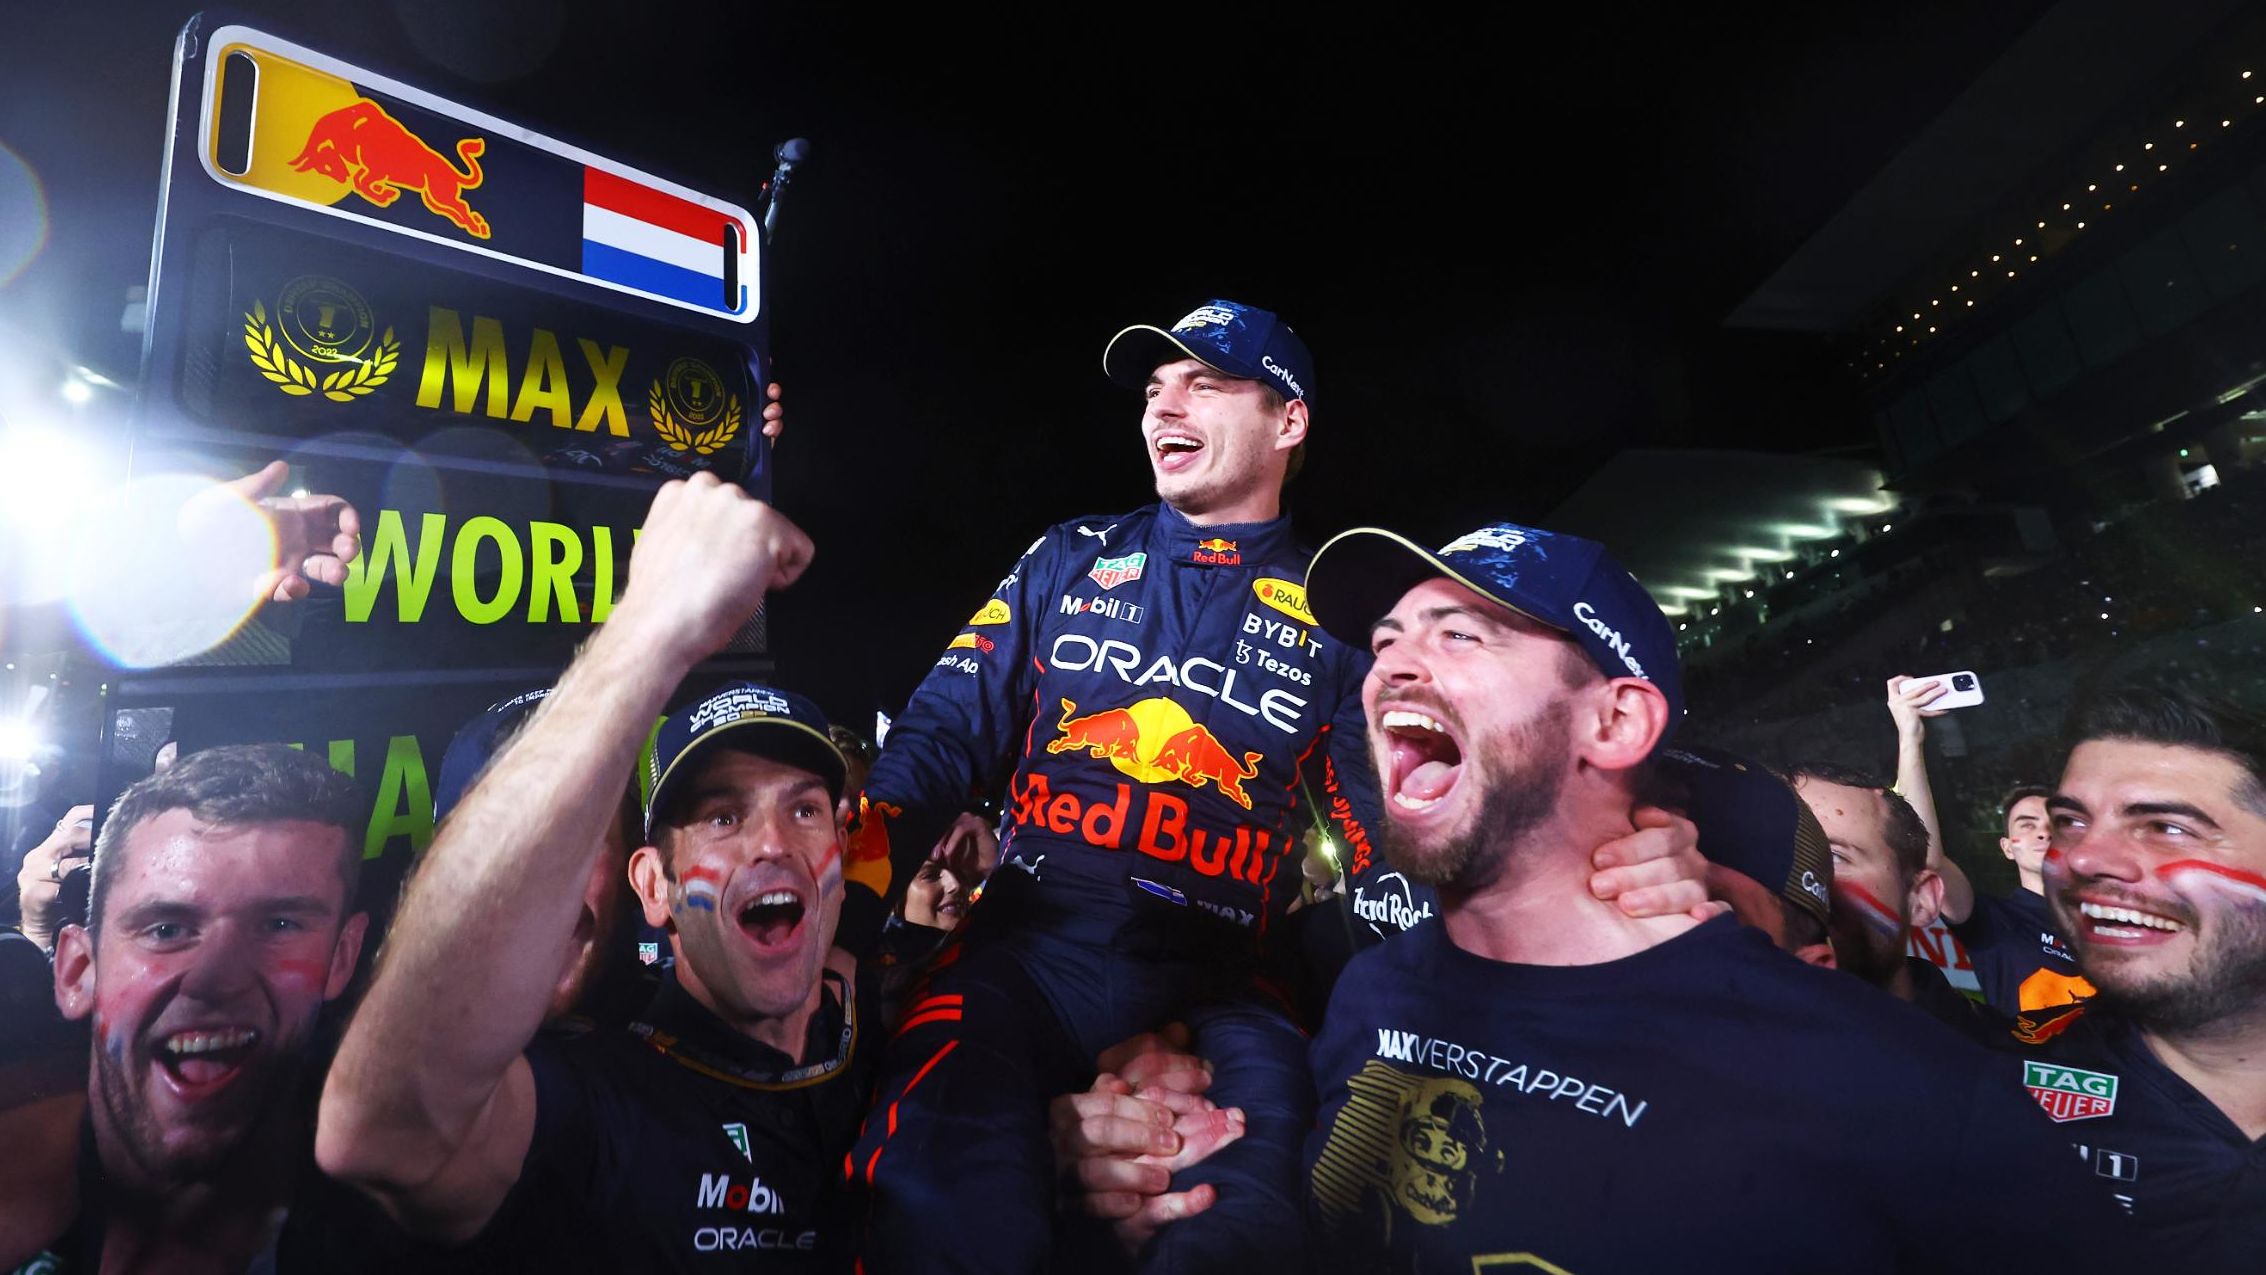 Max Verstappen is held aloft as his Red Bull team celebrates winning the drivers' championship.